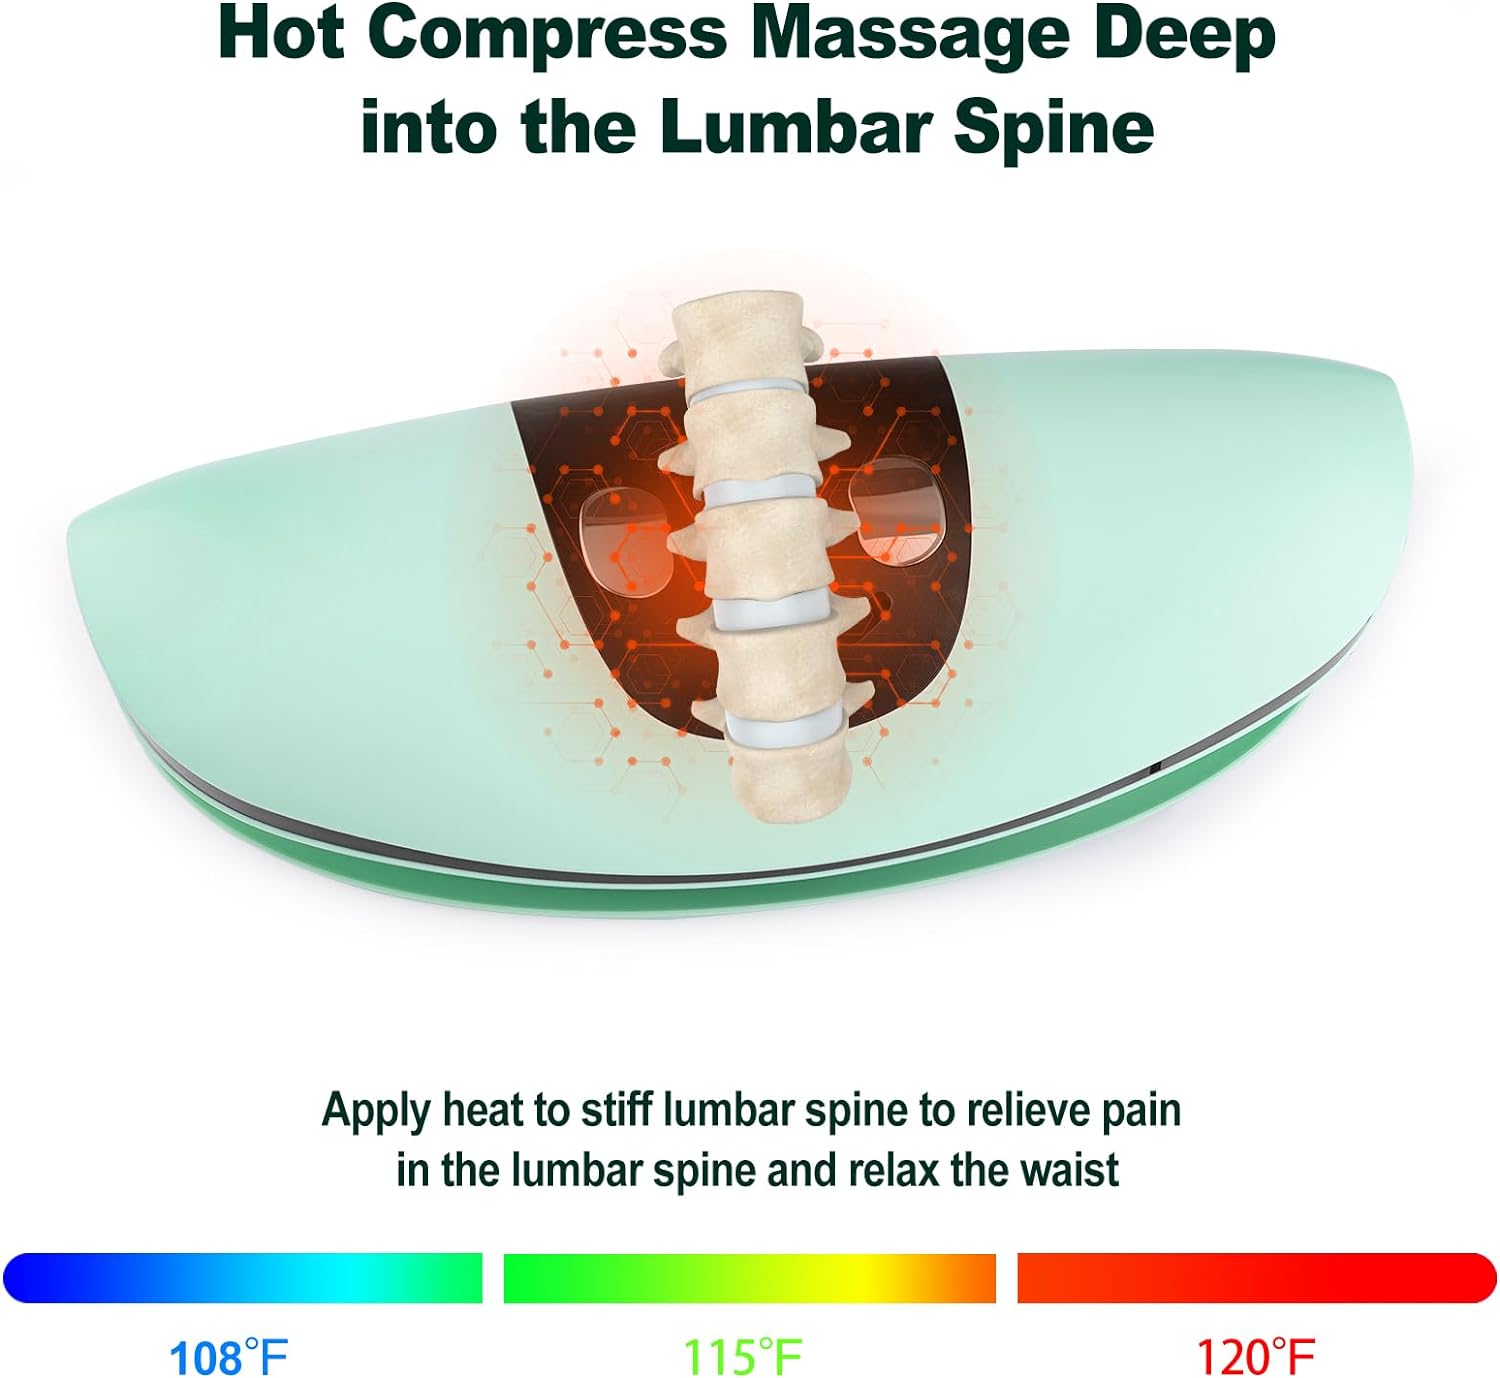 Electric Lumbar Traction Device with Dynamic Airbag- Hotodeal Lower Back Massager Thermal Therapy for Pain Relief